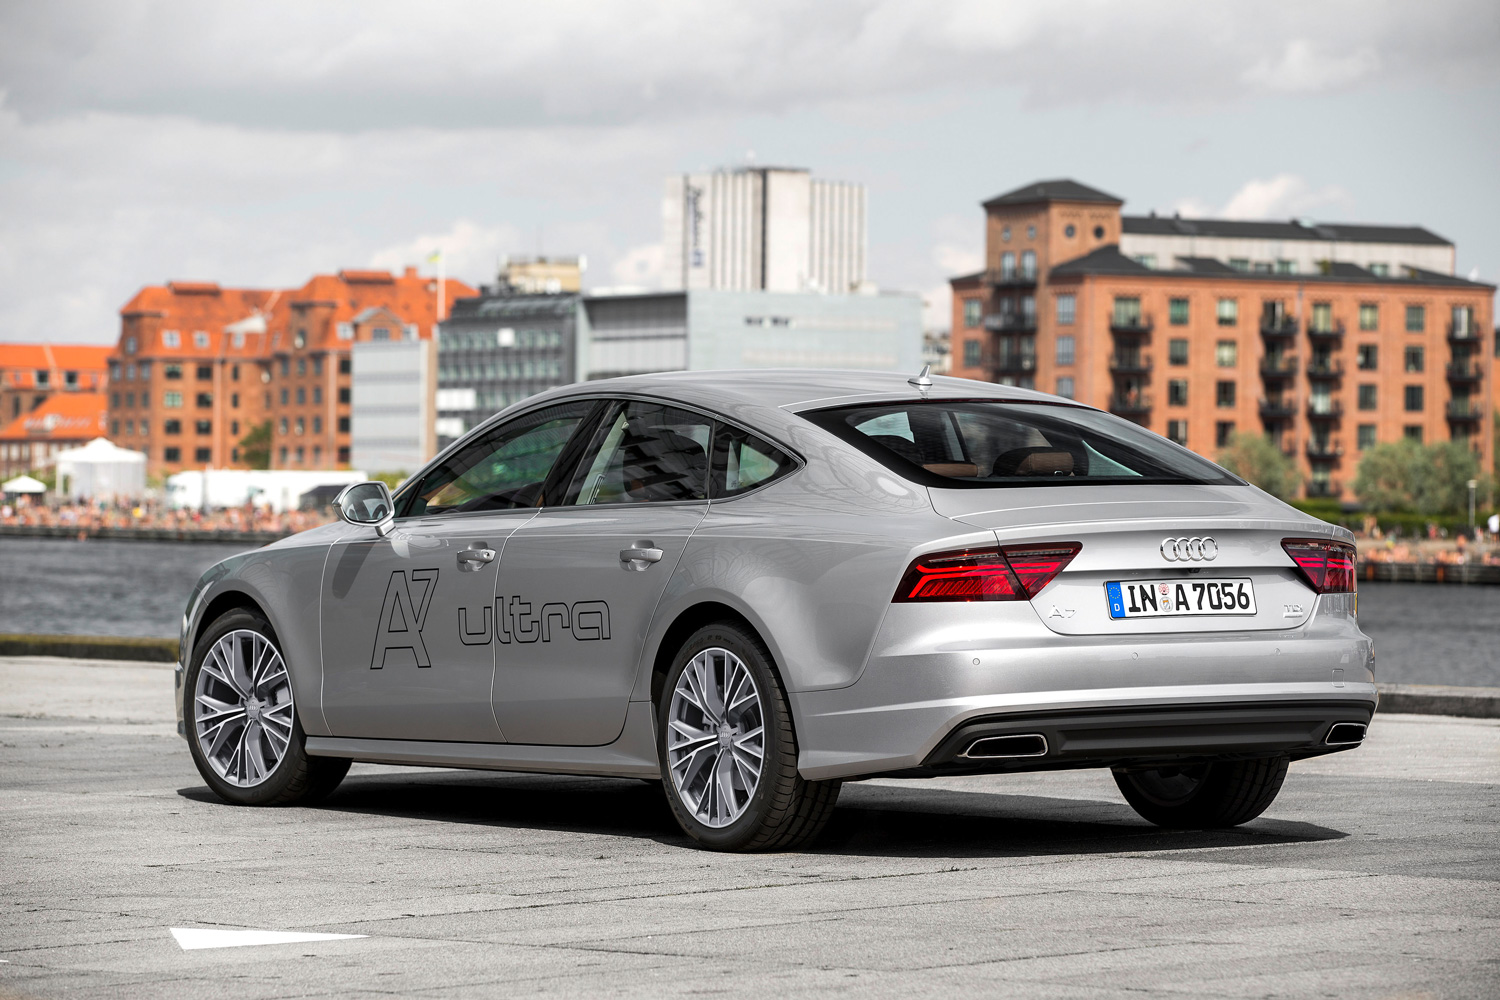 audi map update 2019 download for 2016 audi a6